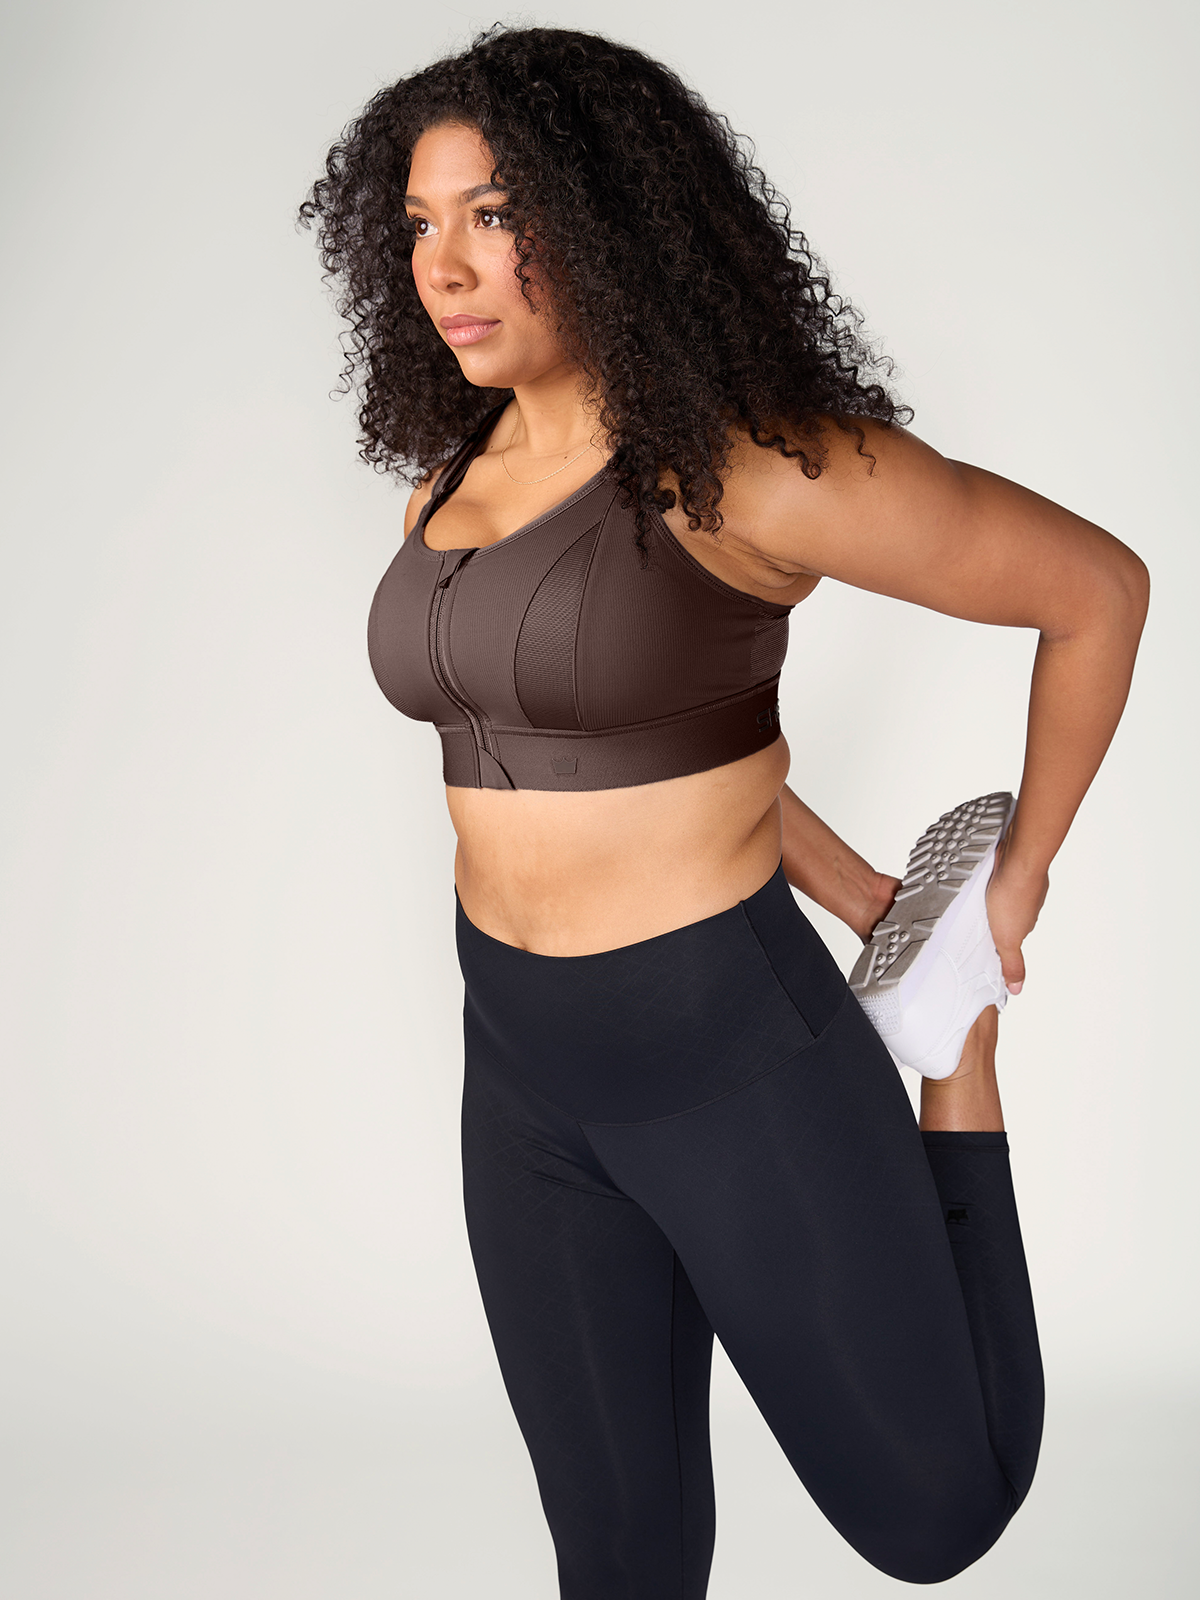 Bra and Tights Pairing $0 - $25 Brown Sports Bras.